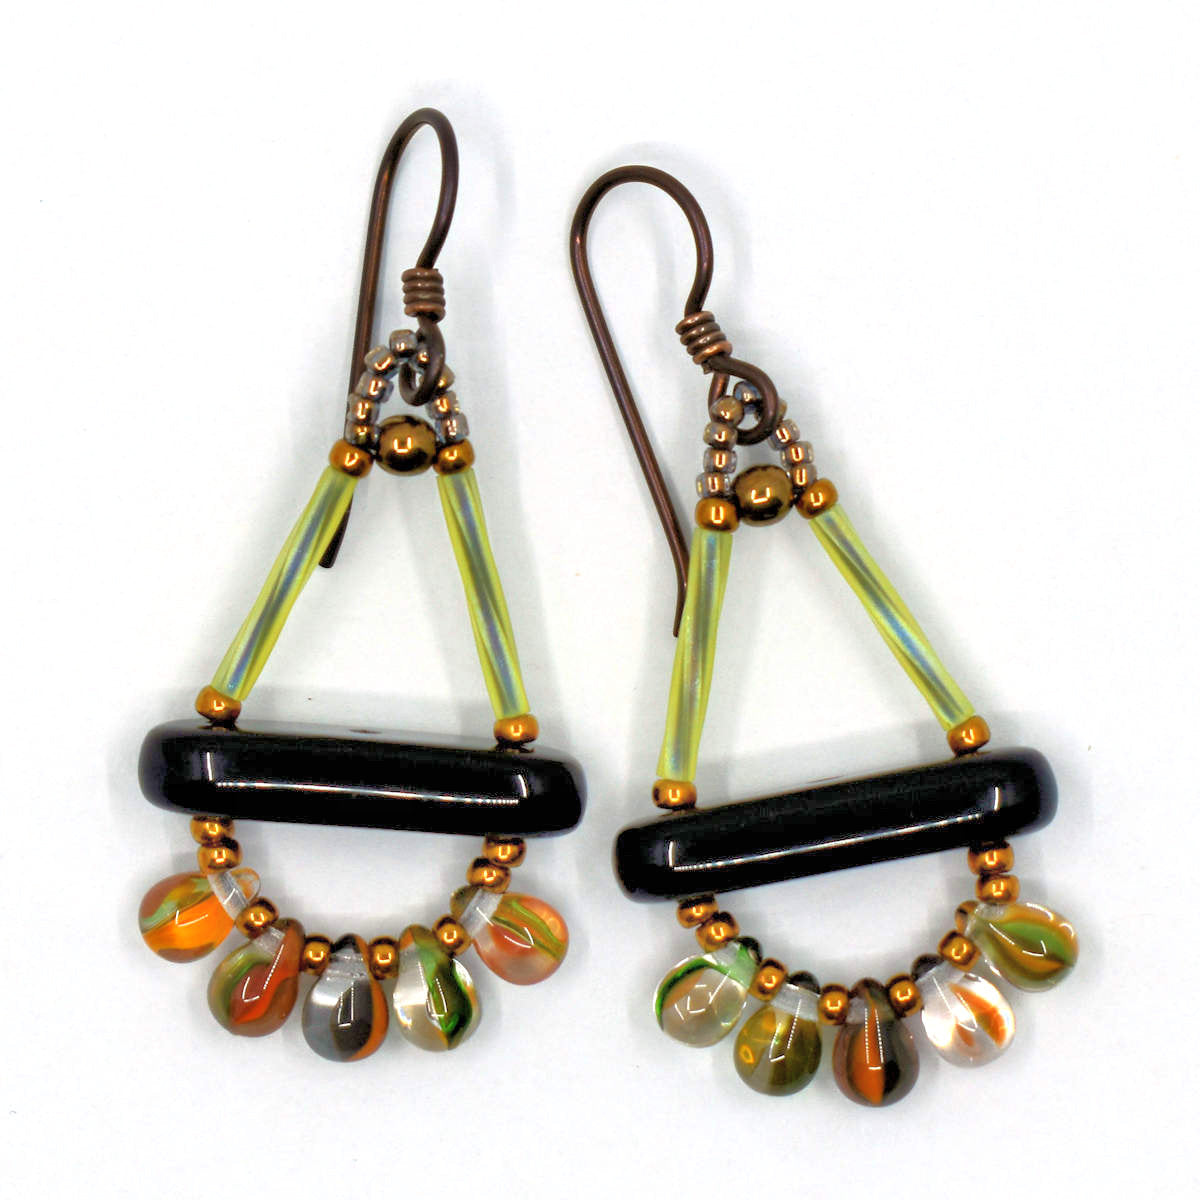 A pair of earrings with a spray of colorful drops at the bottom lays on a white background. The earrings have a triangle shape at the top formed by two light green upright sides and a black bar at the bottom. Below the bar is a swag of five drop beads, each clear with a variety of autumn colored stripes inside of it.. 